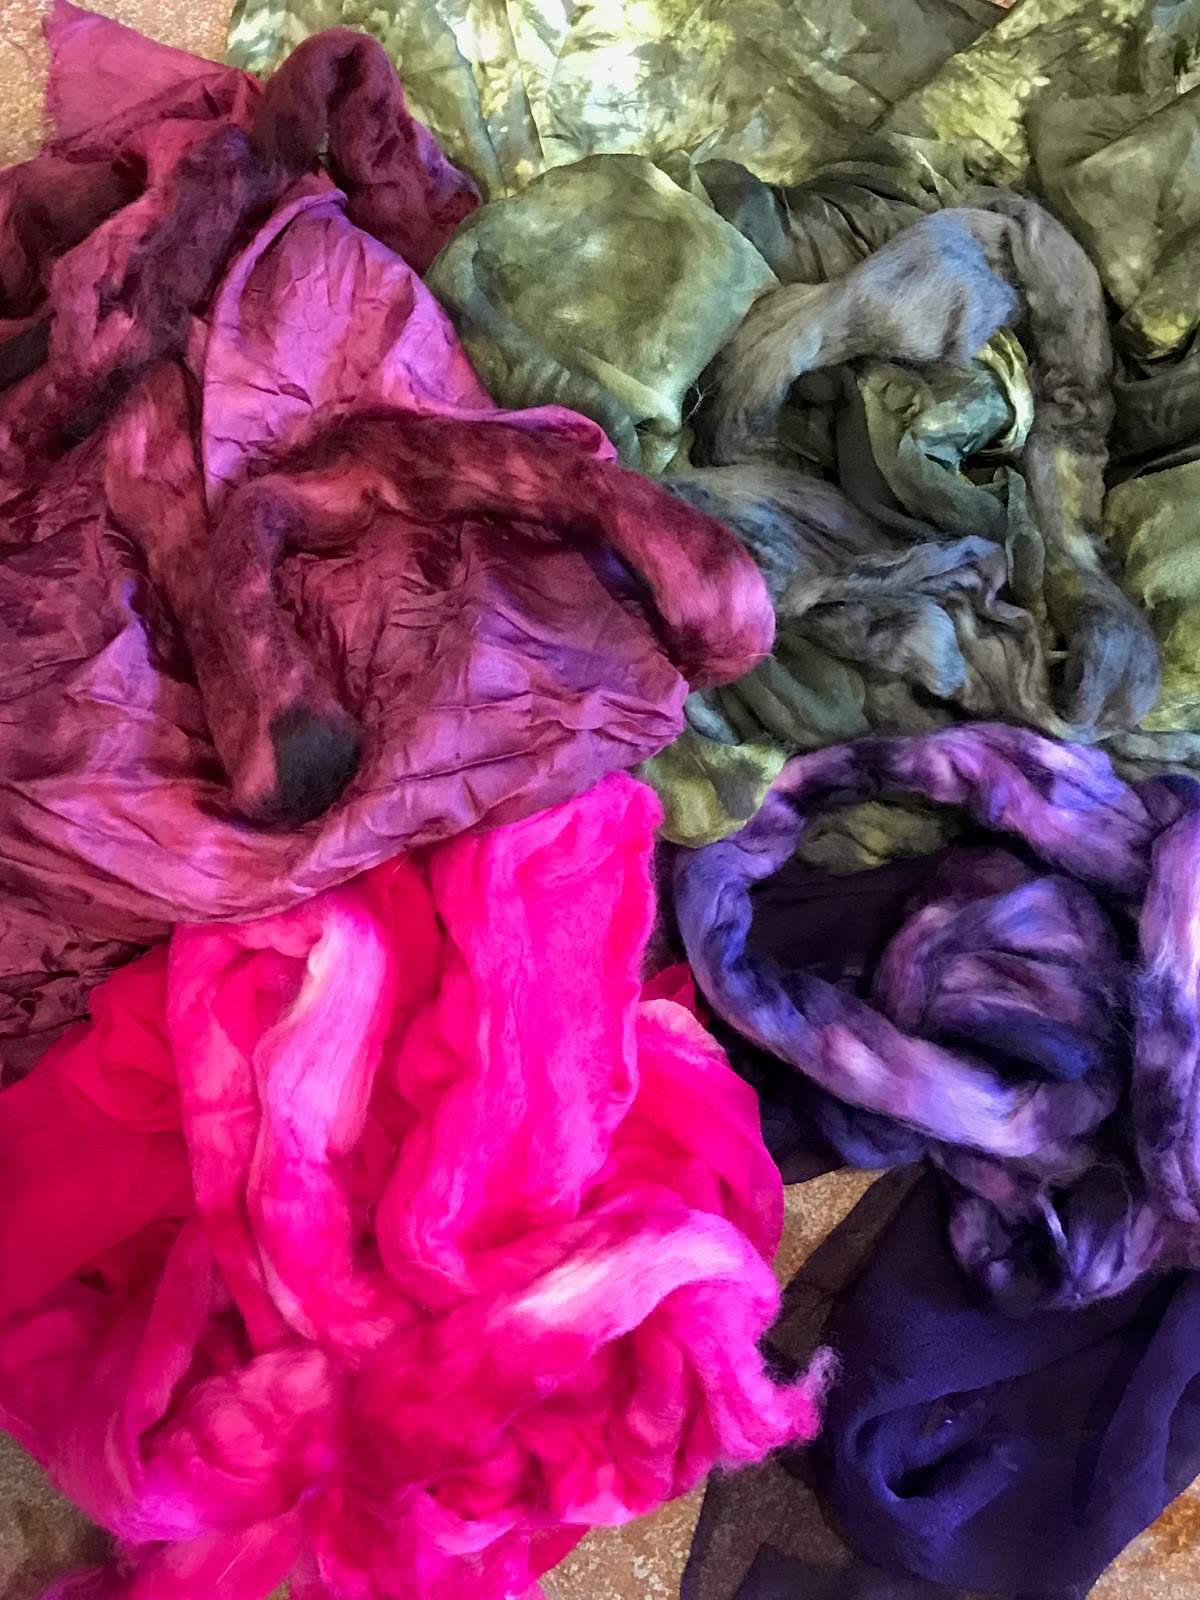 Beth's Blog: The Newly Dyed Fabrics - Part II  Fabric dyeing techniques,  How to dye fabric, Hand dyed fabric